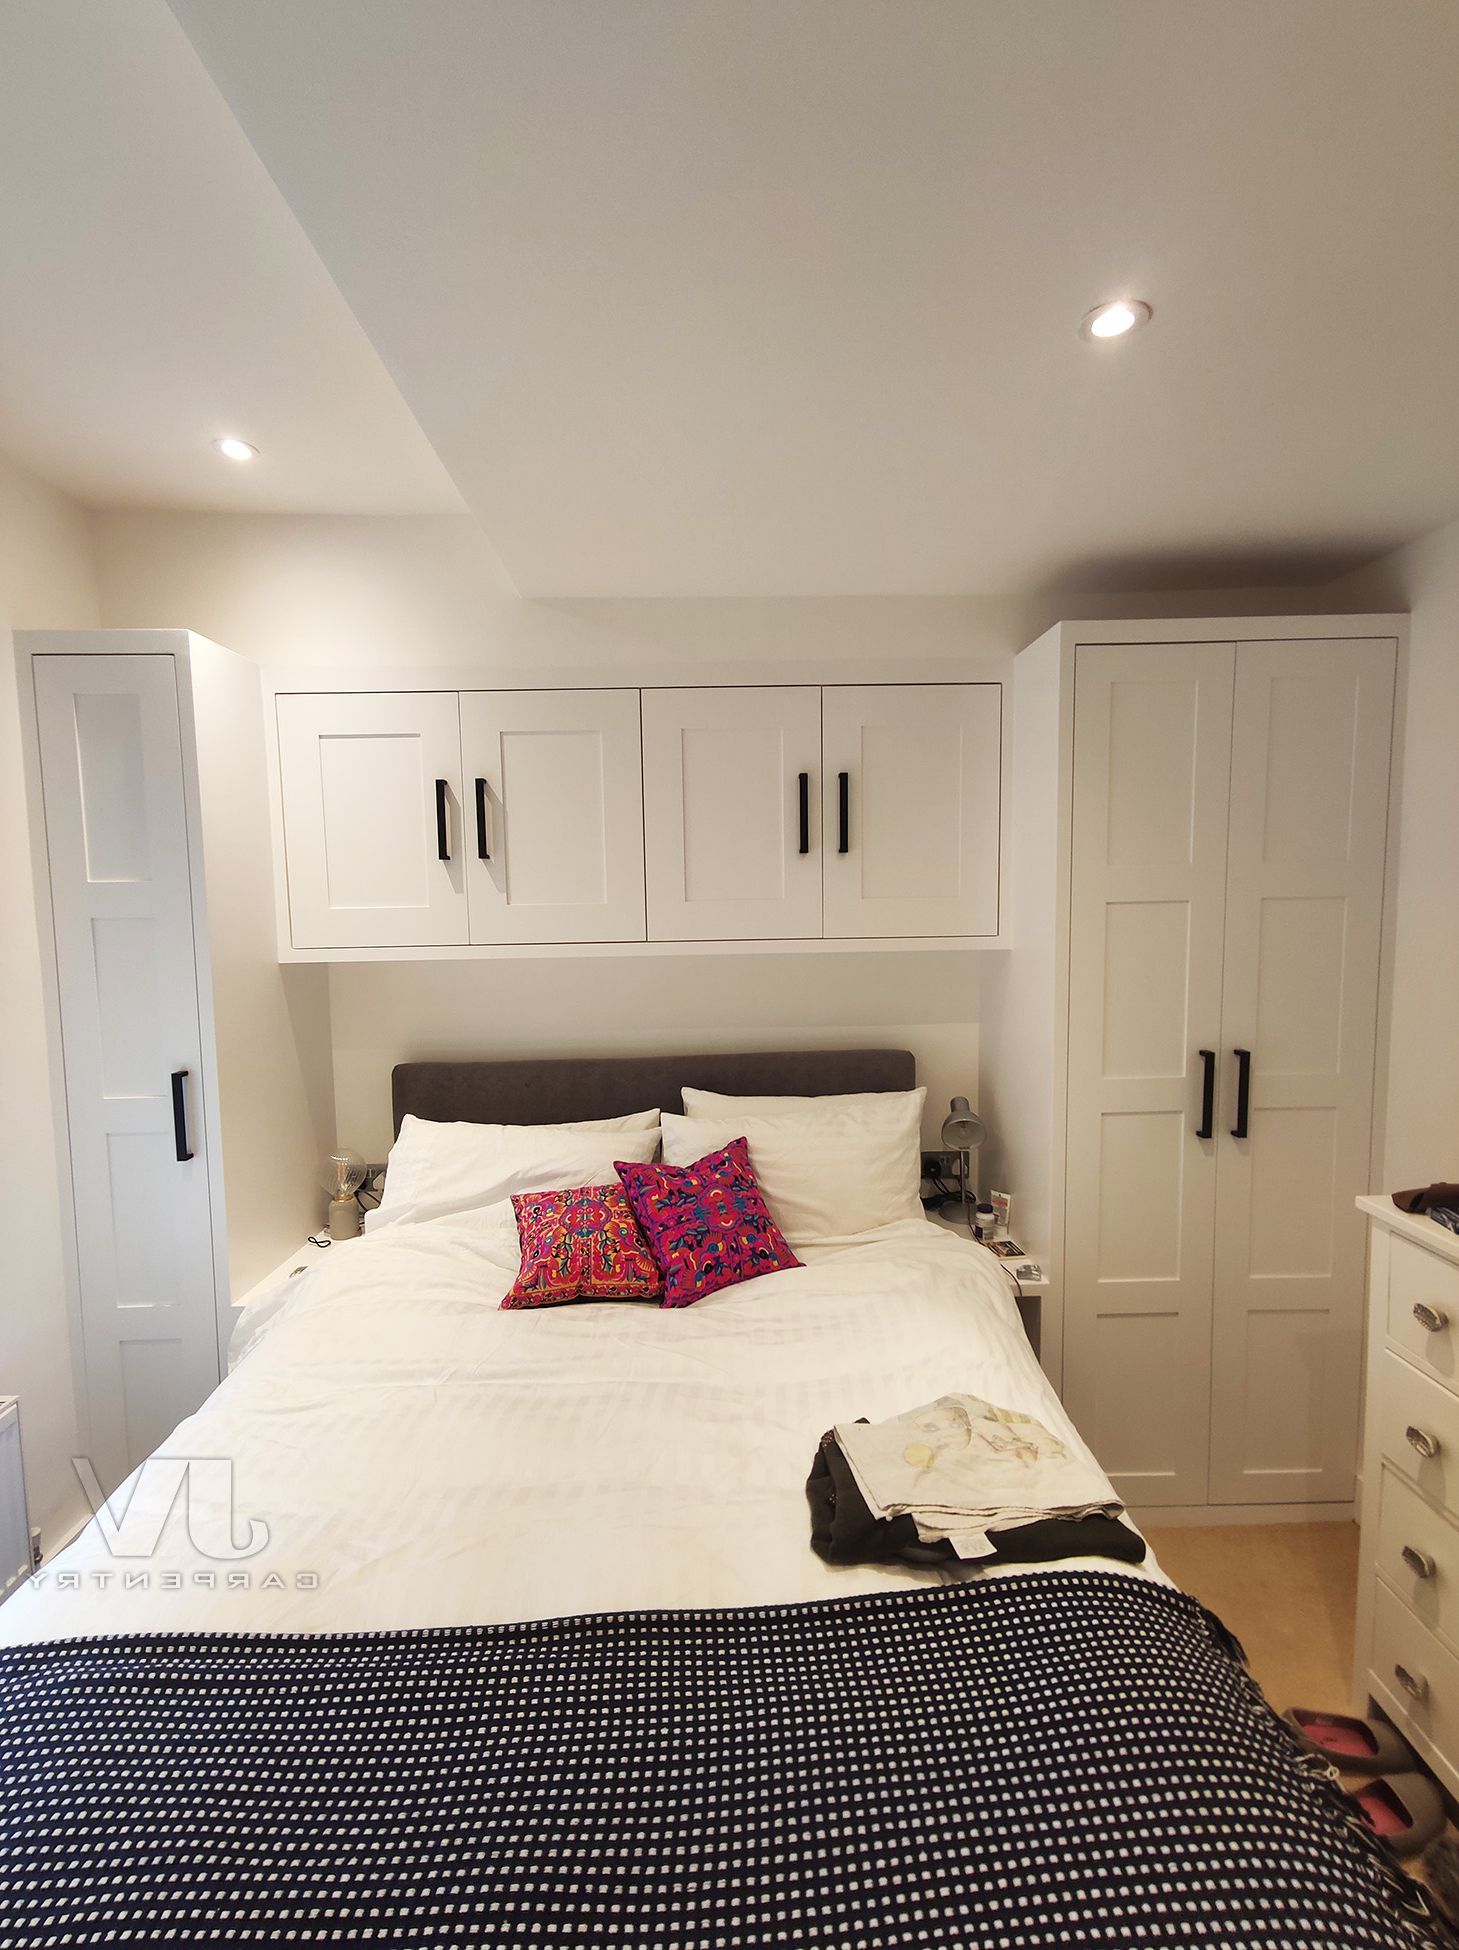 12 Fitted Wardrobes Over Bed Ideas For Your Bedroom | Jv Carpentry Within Over Bed Wardrobes Sets (Gallery 9 of 20)